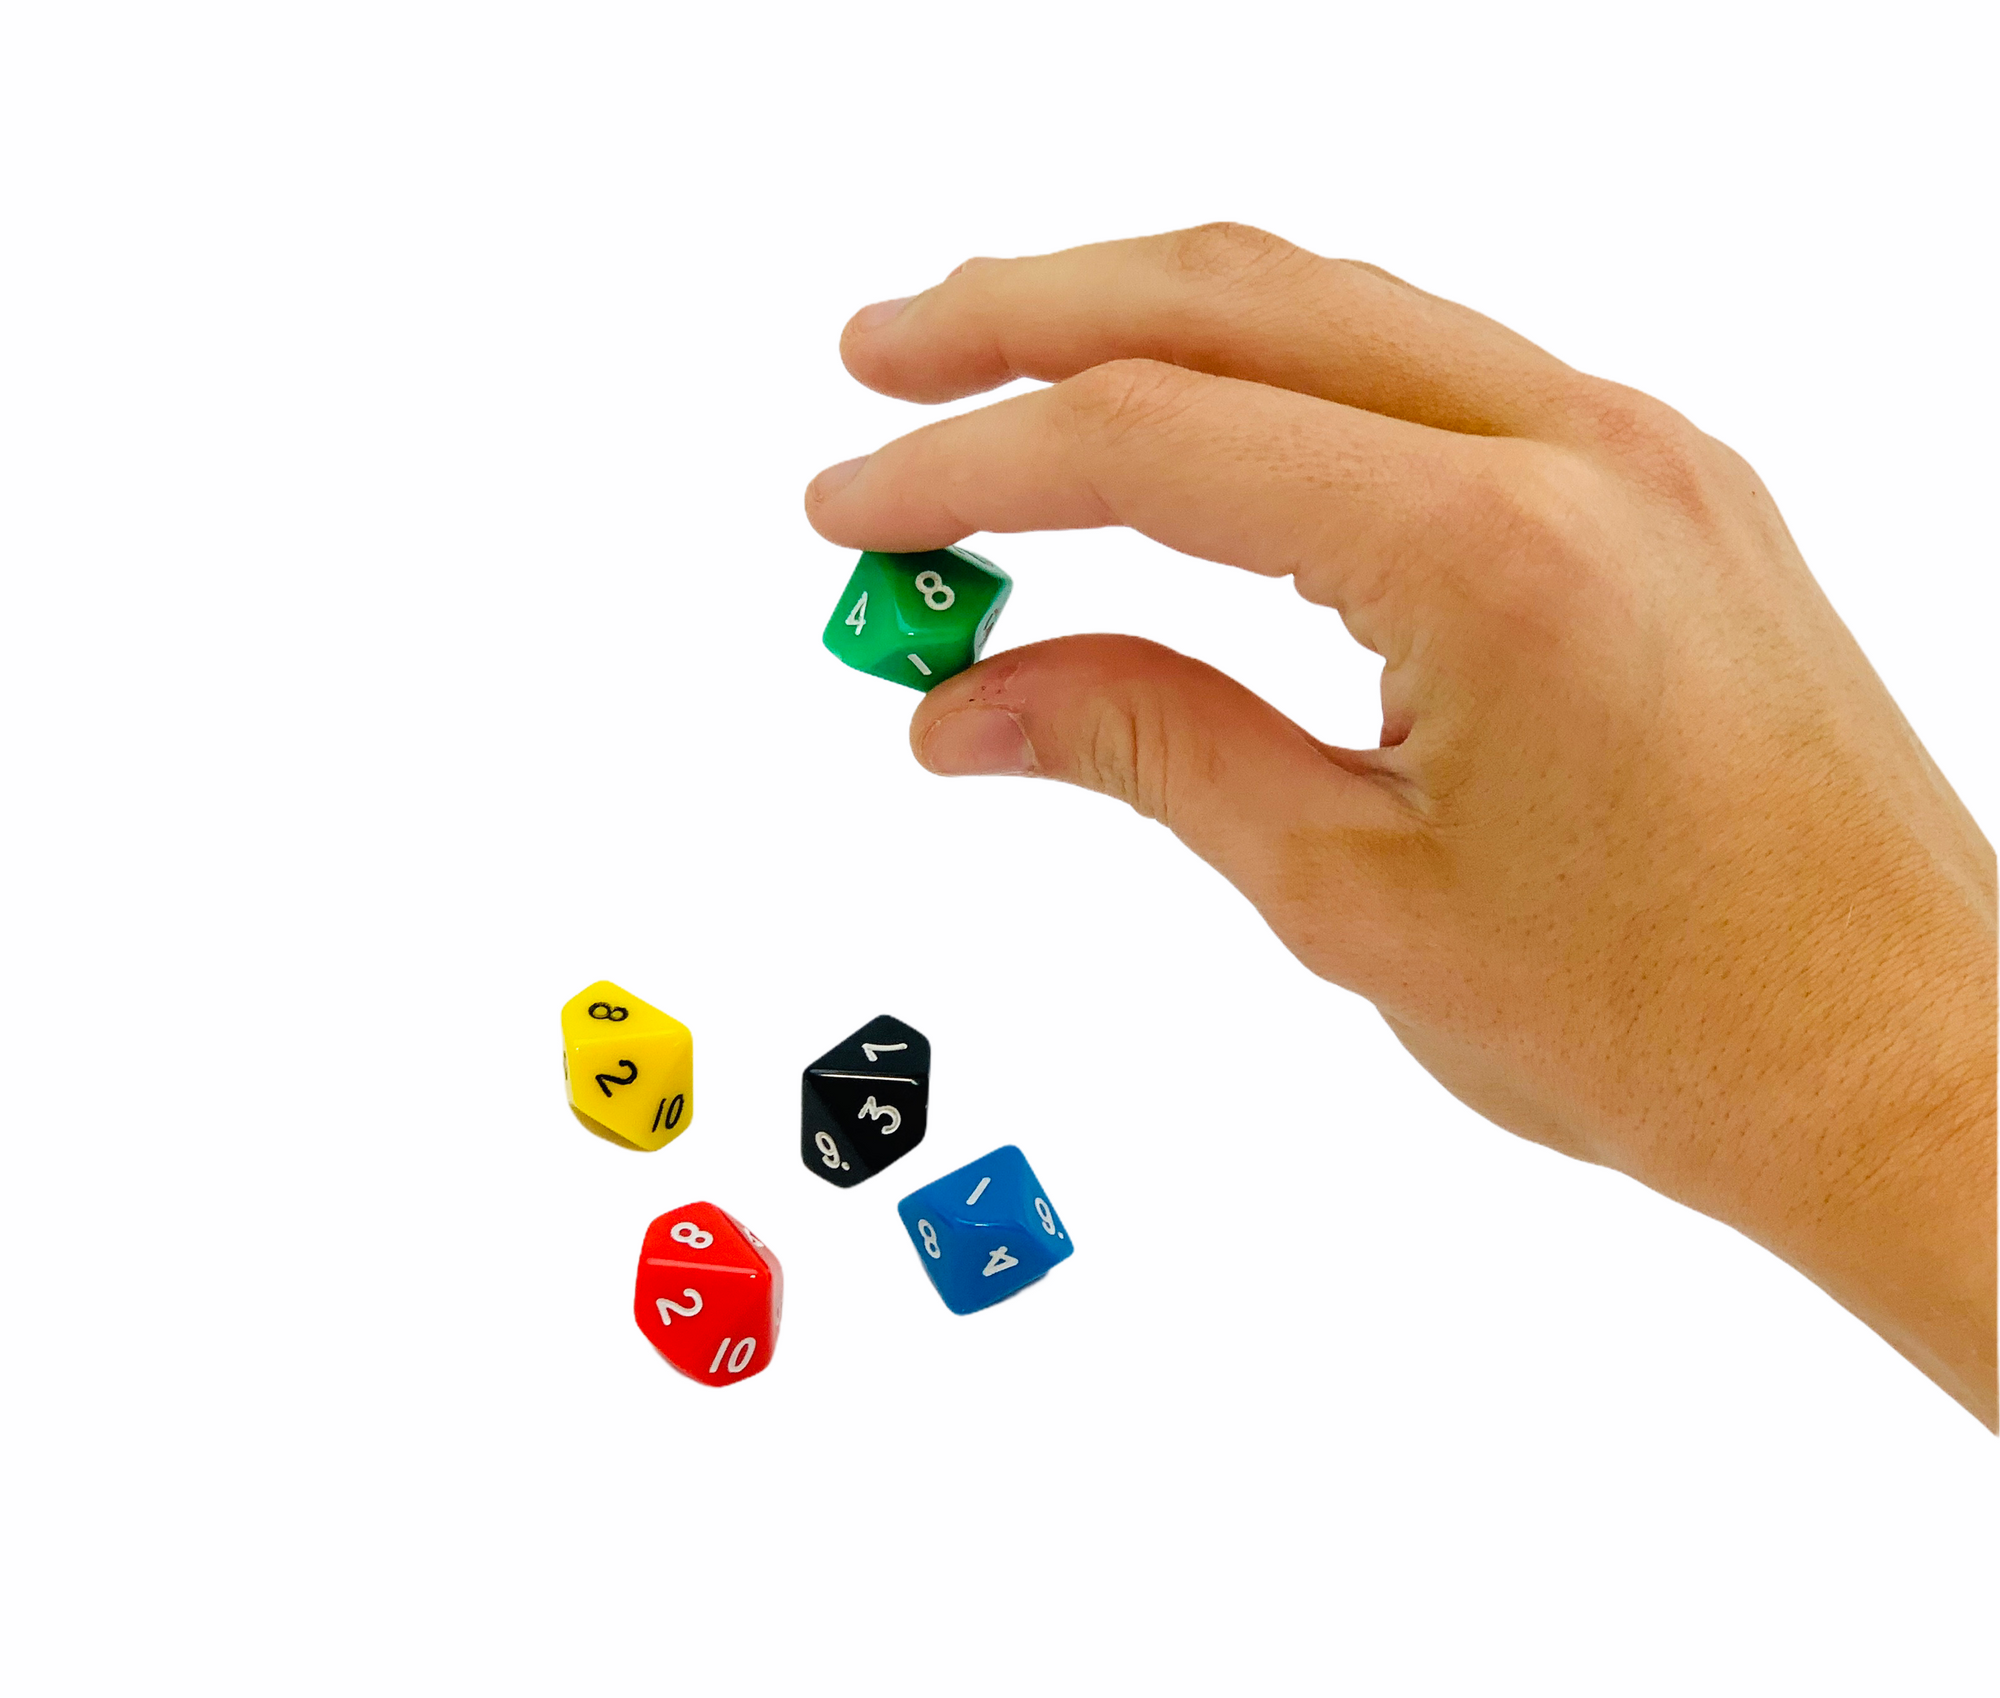 Numeral Dice 1-10 laid out on white back ground with hand holding the green dice